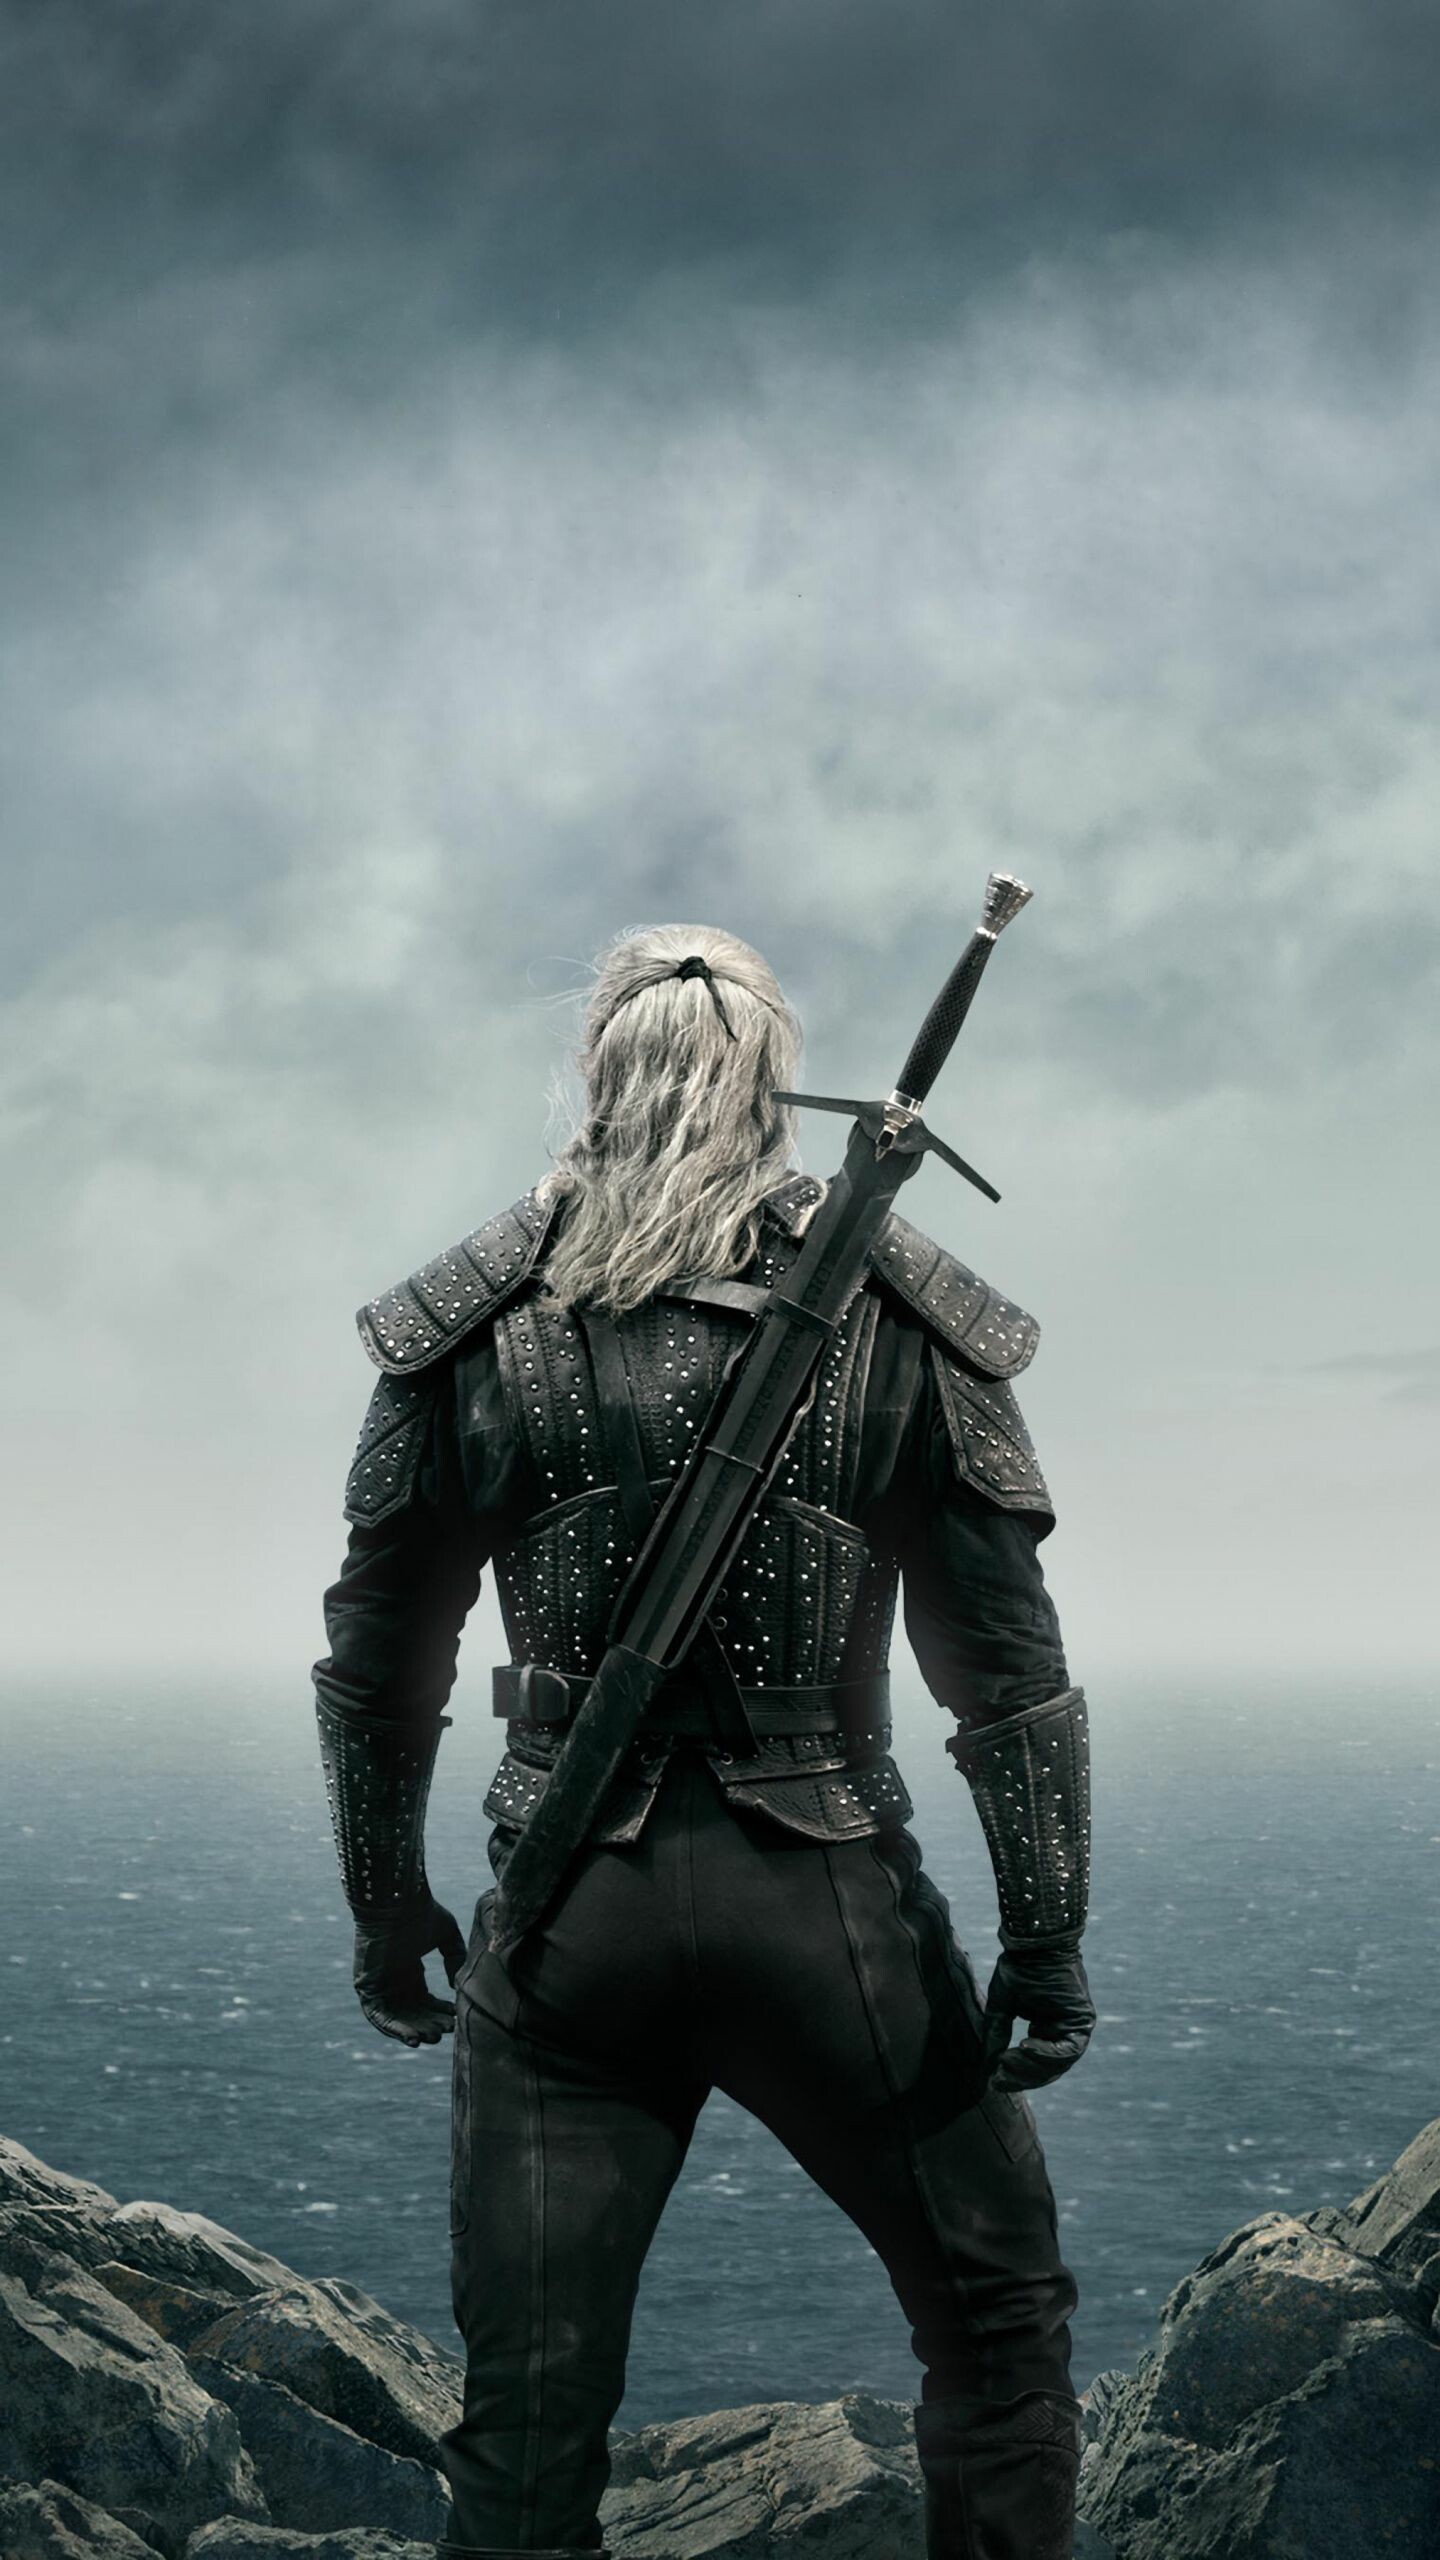 The Witcher (TV Series): He loved the sorceress Yennefer, considered the love of his life despite their tumultuous relationship, and became Ciri's adoptive father. 1440x2560 HD Wallpaper.